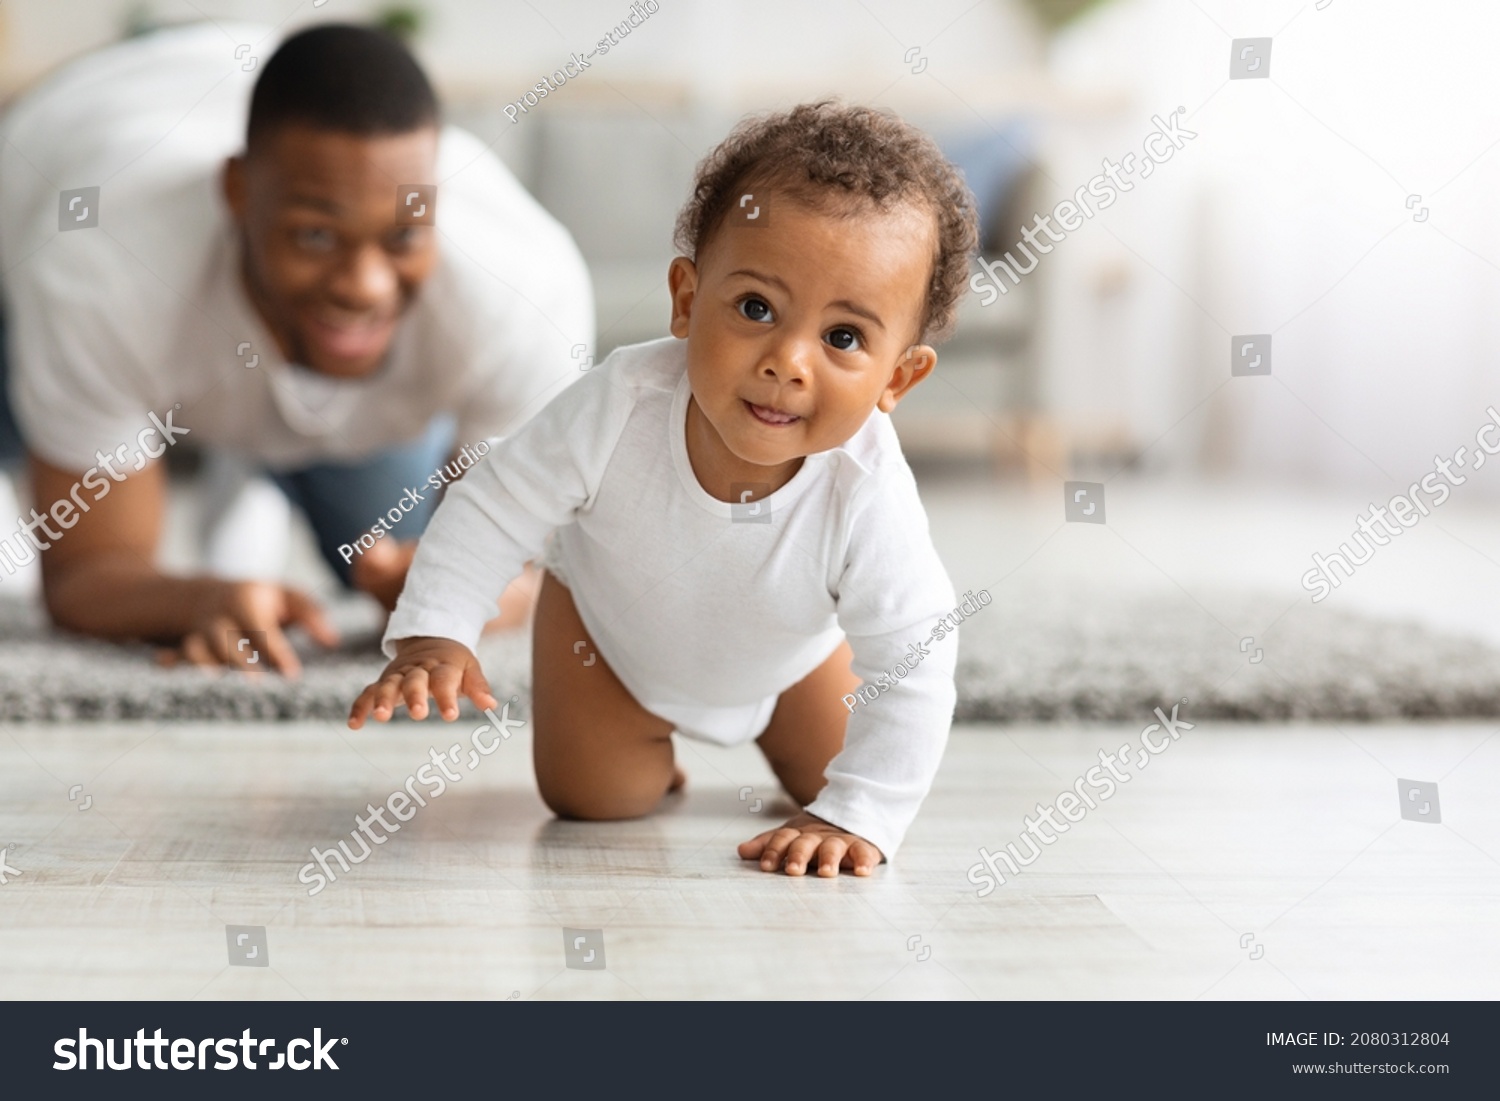 Cute Little Black Infant Baby Crawling On Floor At Home, Proud Young Father Looking At Him And Smiling, Dad And Toddler Child Enjoying Spending Time Together, Selective Focus With Copy Space #2080312804